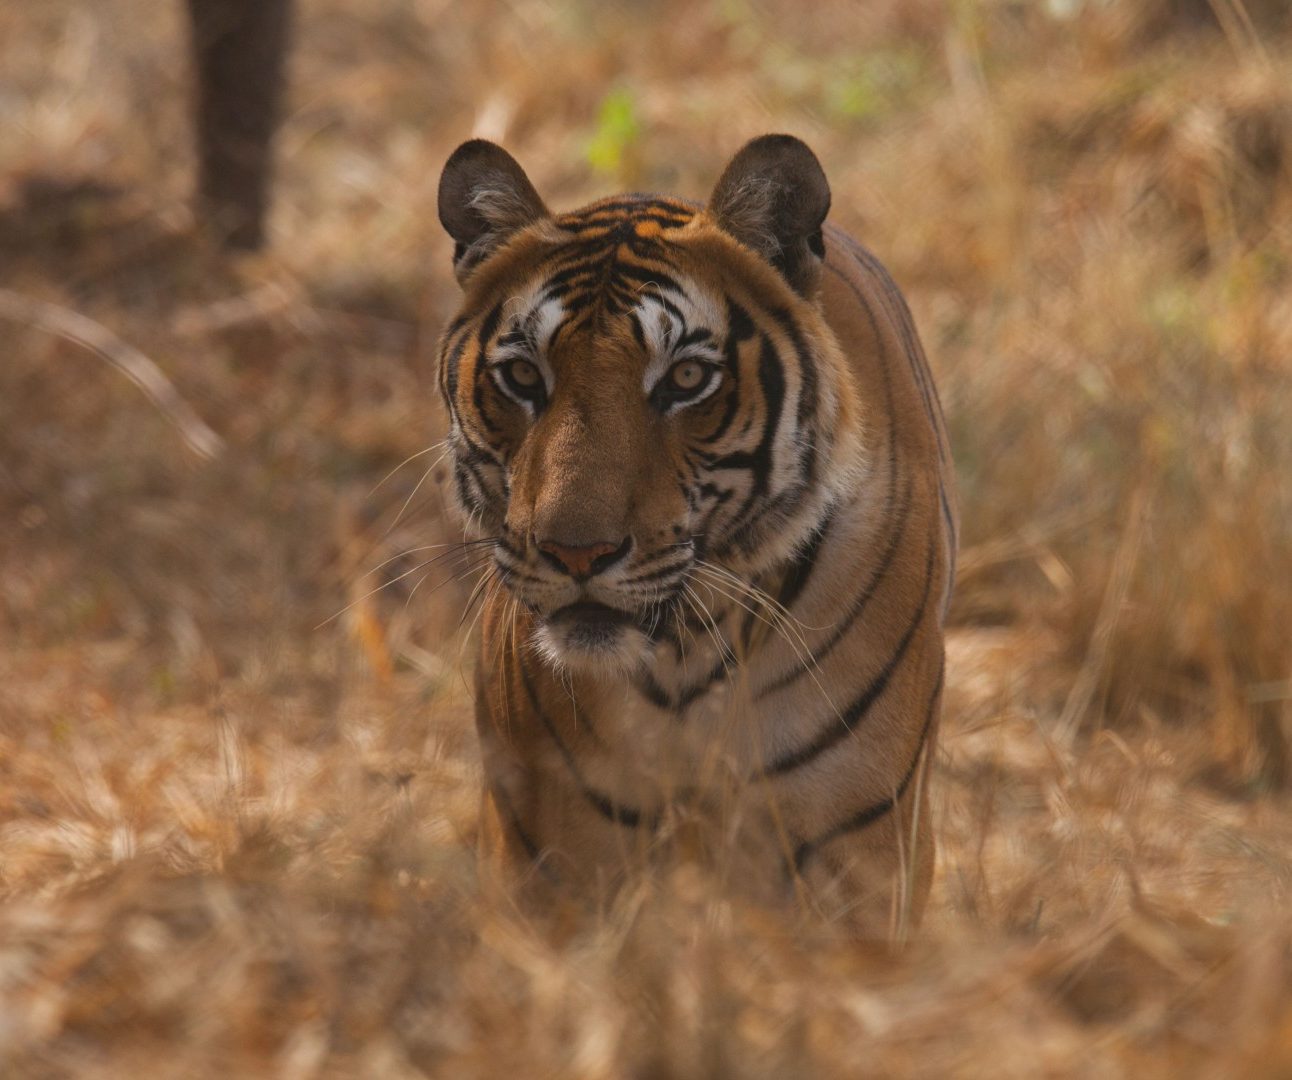 A Bengal tiger standing serenely in dense shrubland